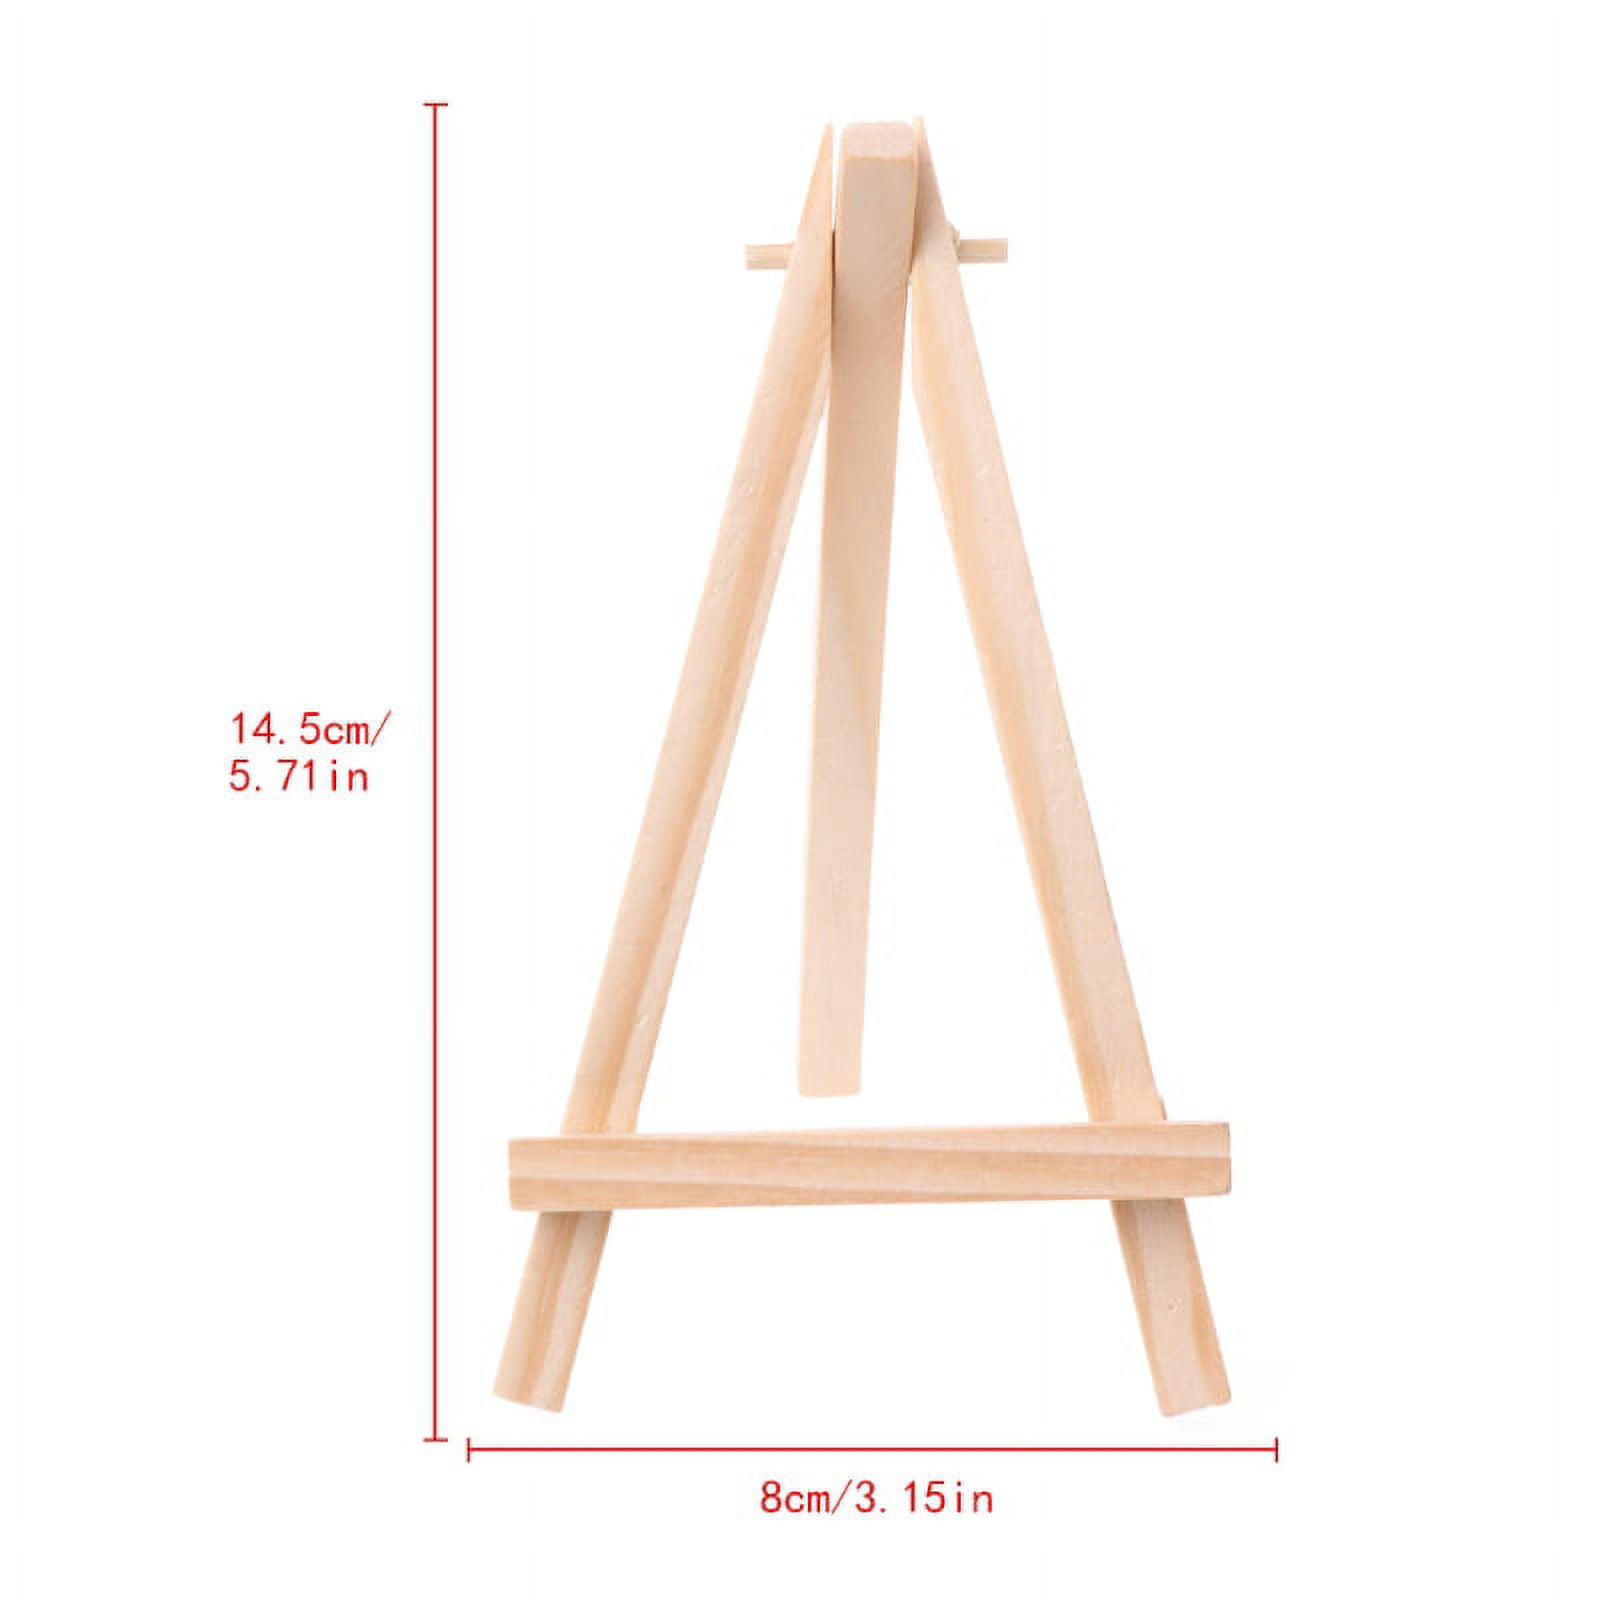 Auvanteo Portable 9 Wood Tripod Tabletop Display Easel for Artist Painting, Sketching, Displaying Photos, Decorative Plates and More